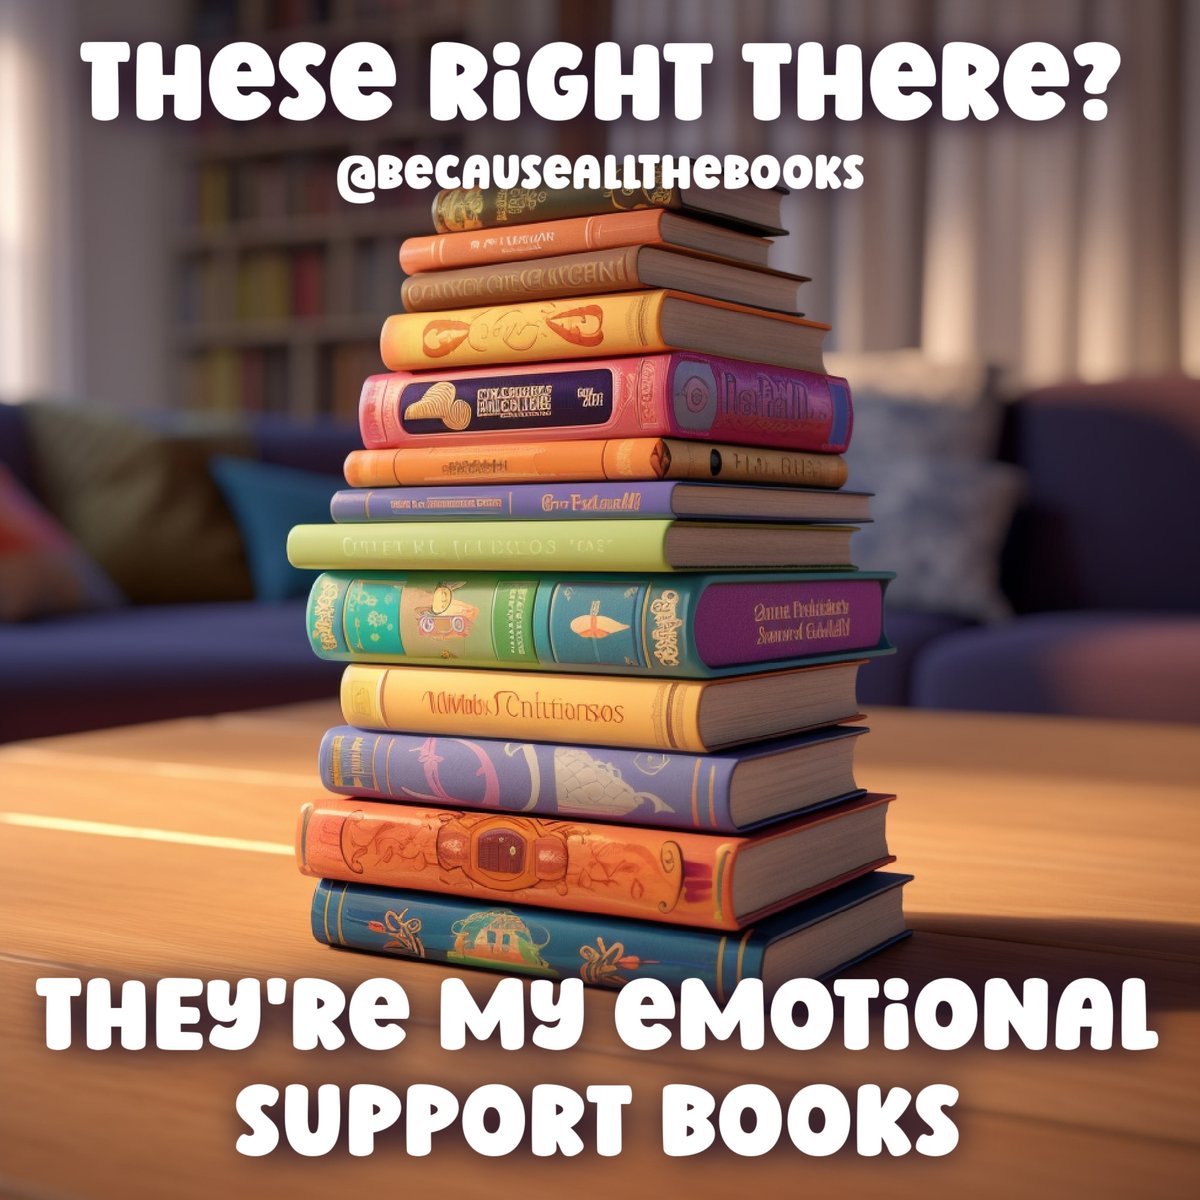 Surely you know someone who needs emotional support books!

#BecauseAllTheBooks #BooksLover #BookNerd #ILoveBooks